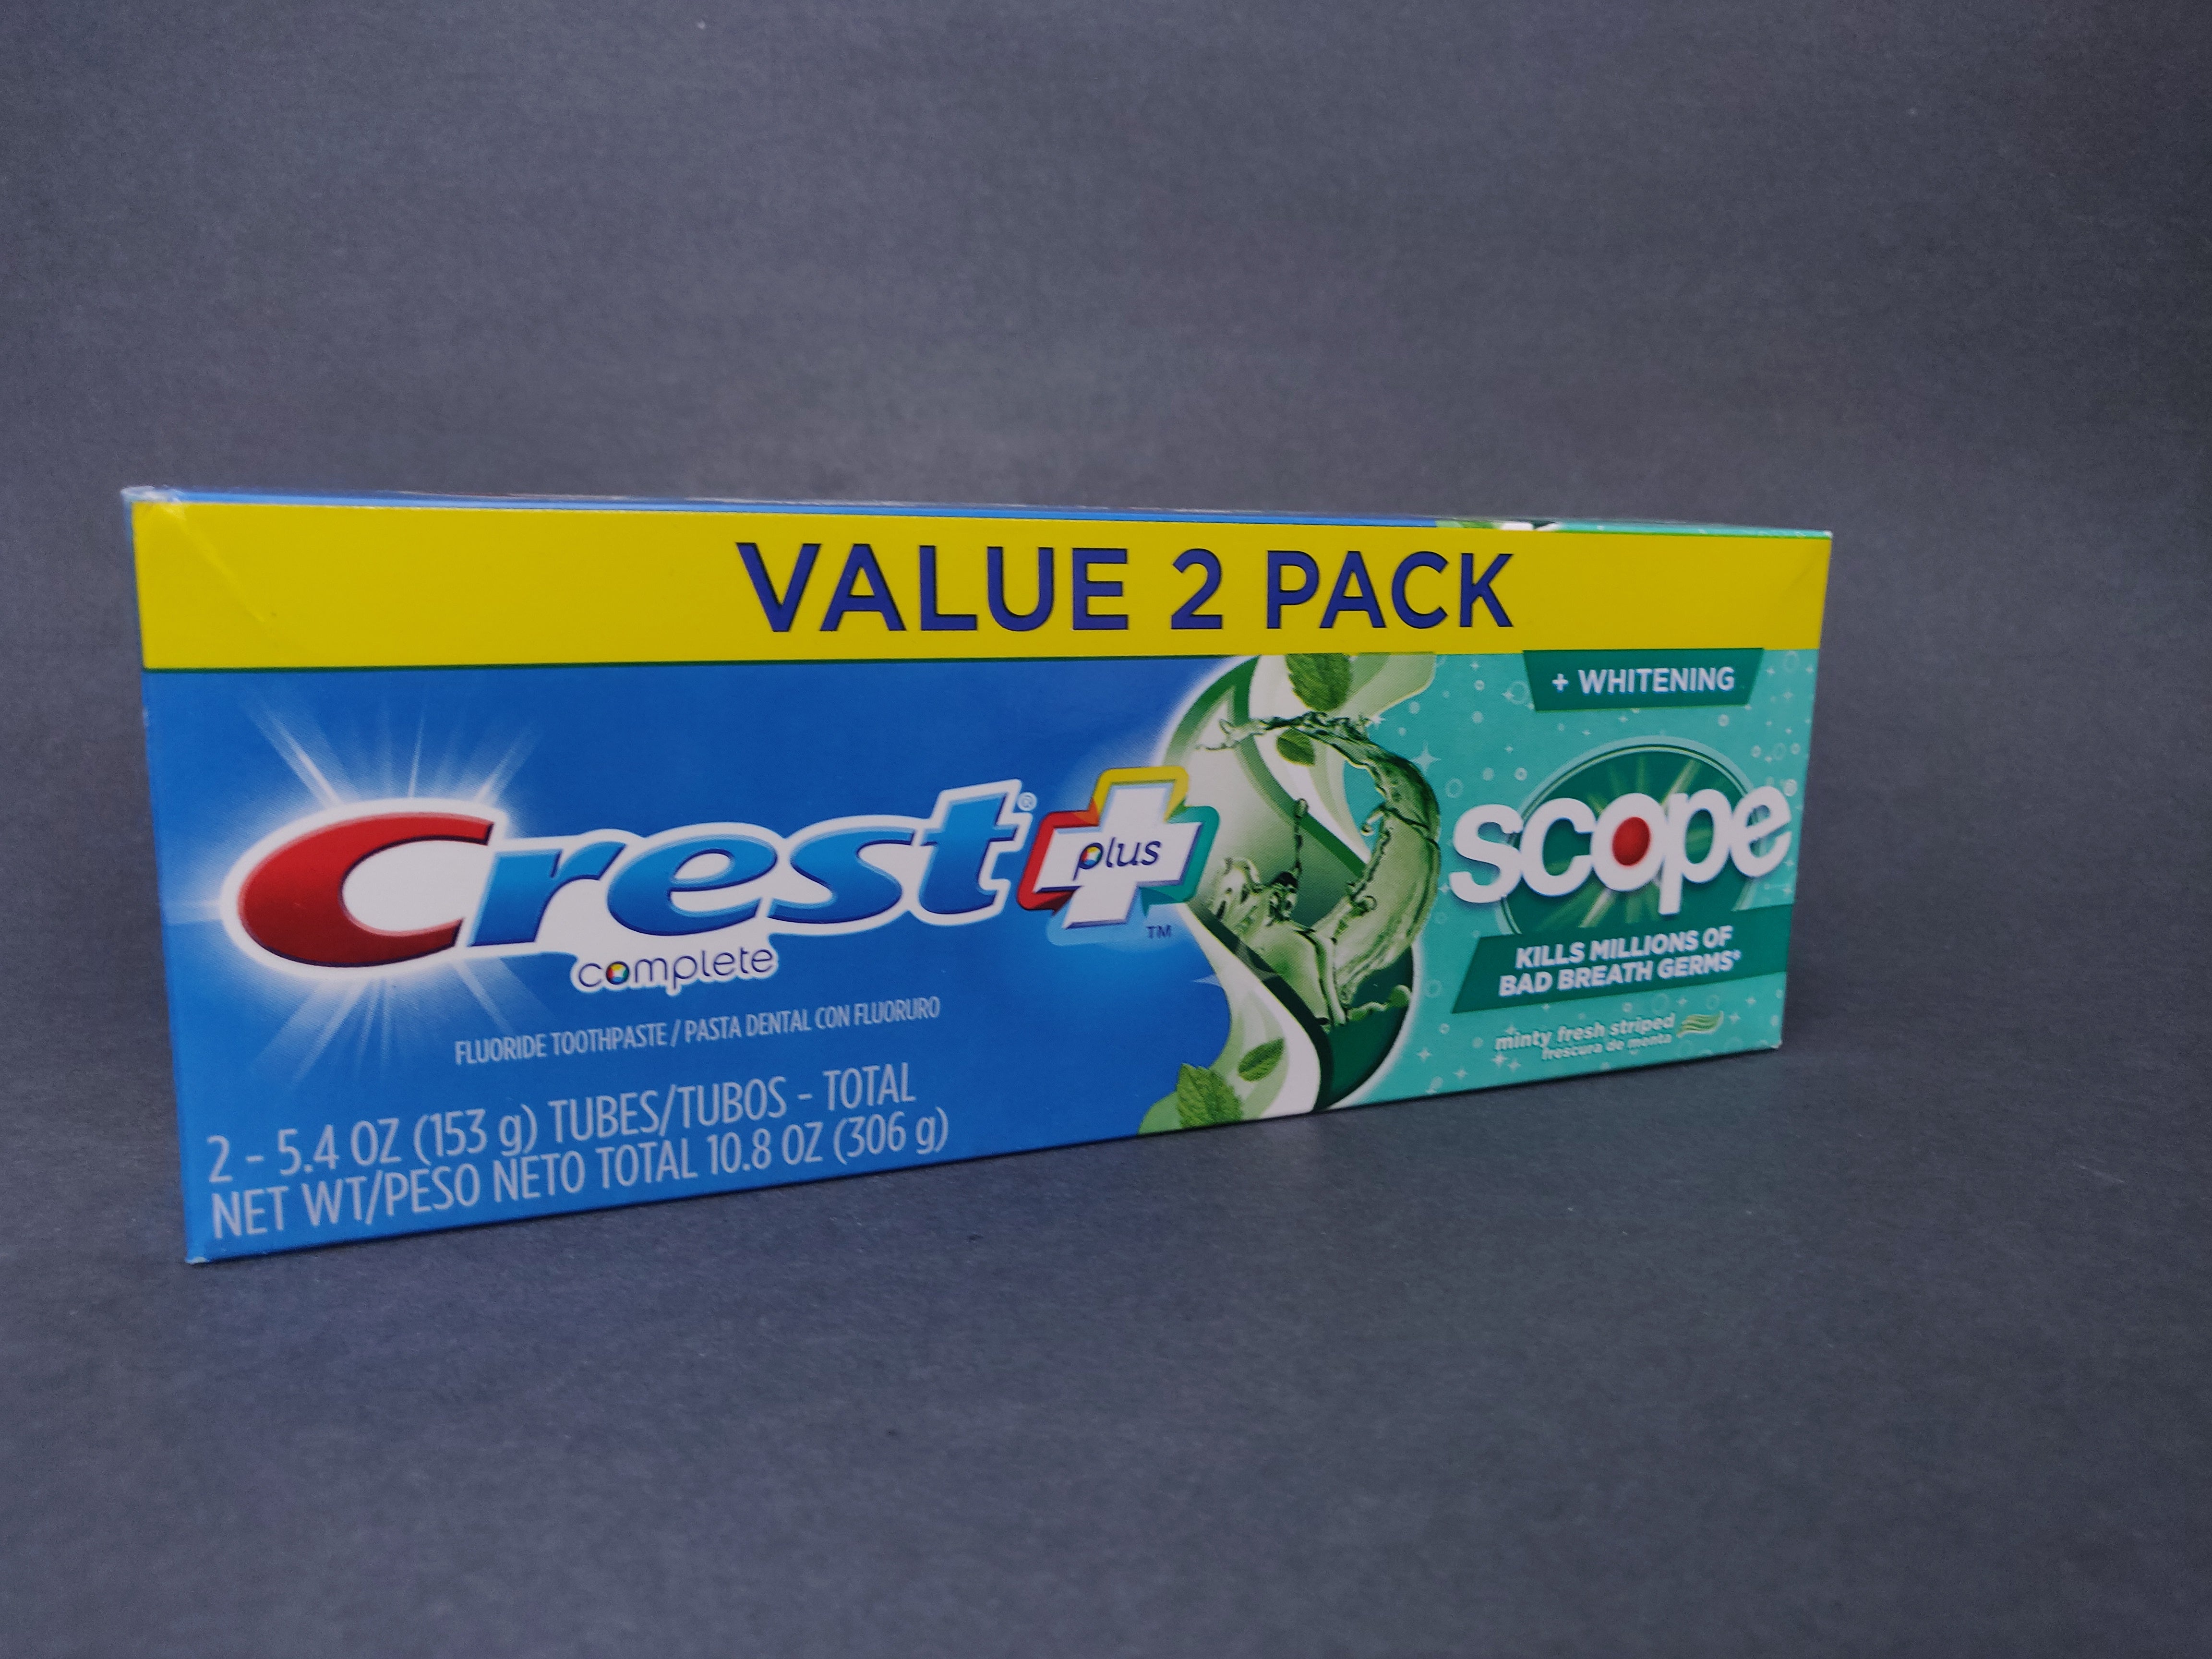 Crest Complete Toothpaste, Whitening Plus Scope, Value 2 Pack - 5.4oz tubes